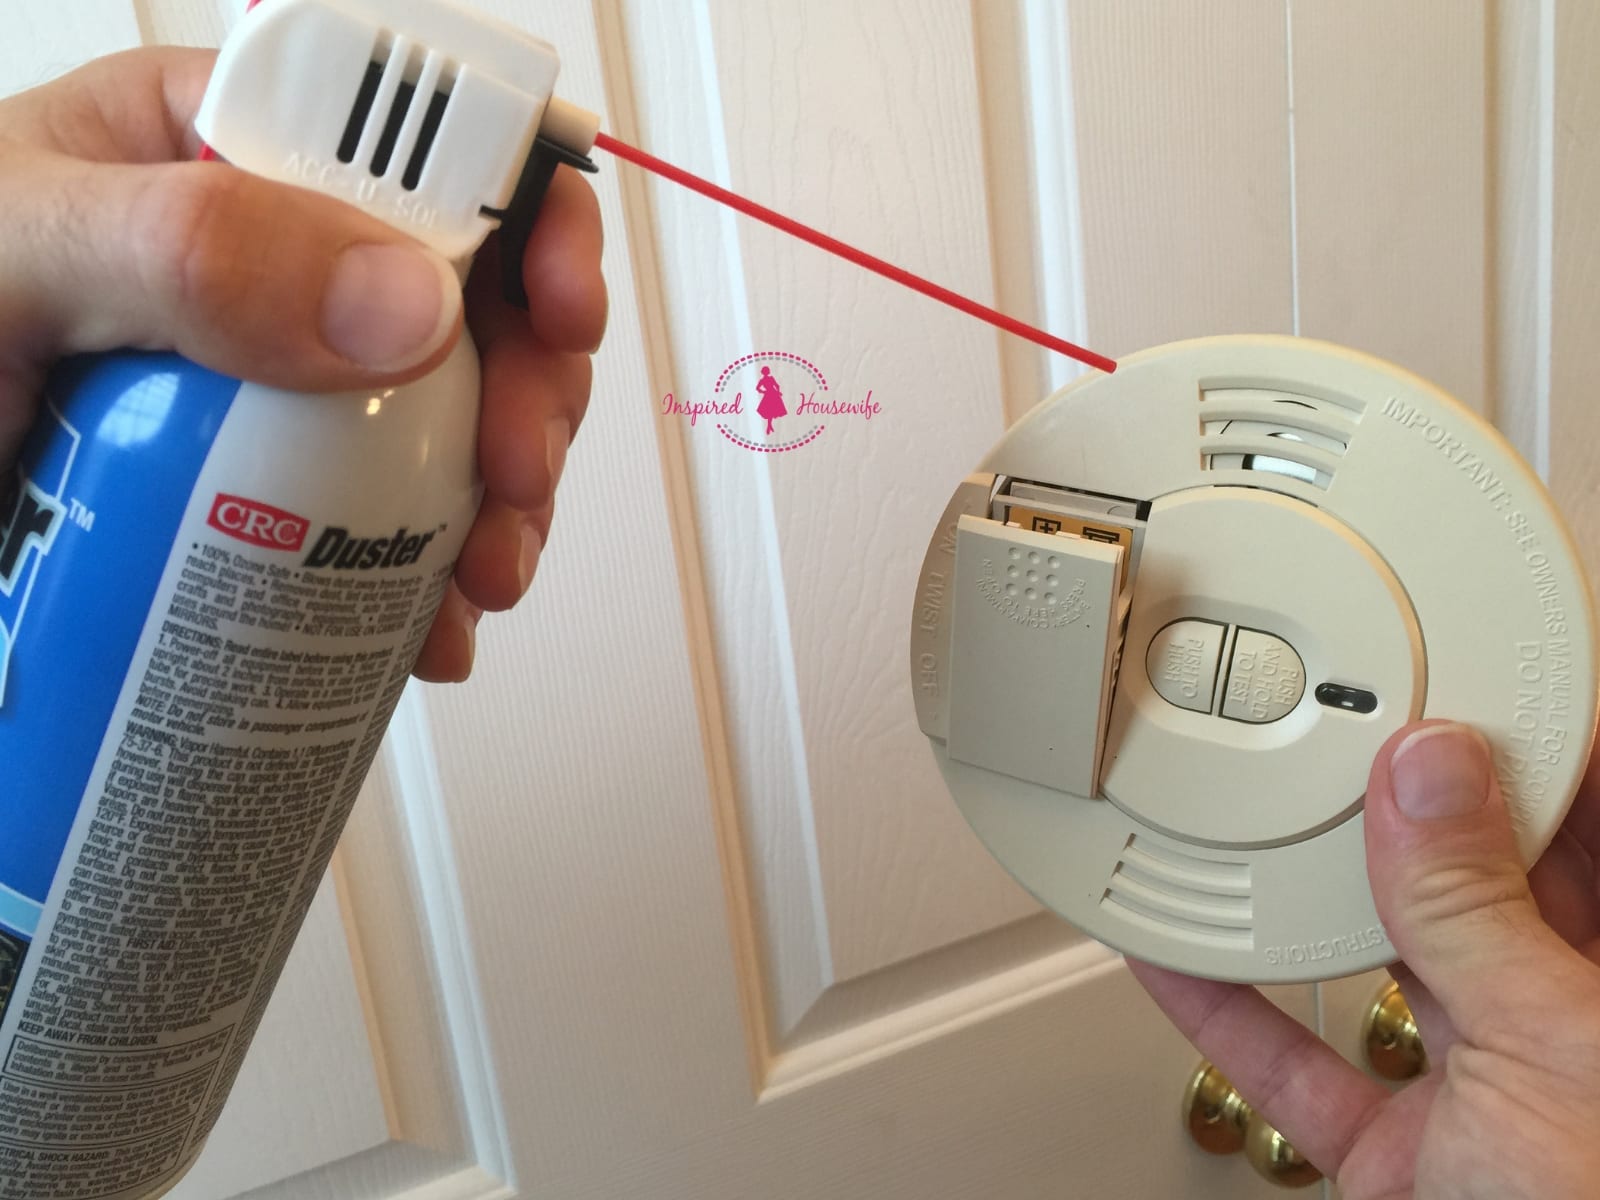 How To Turn Off My Fire Alarm How to Easily Stop Smoke Detector Beeping or Chirping | Inspired Housewife